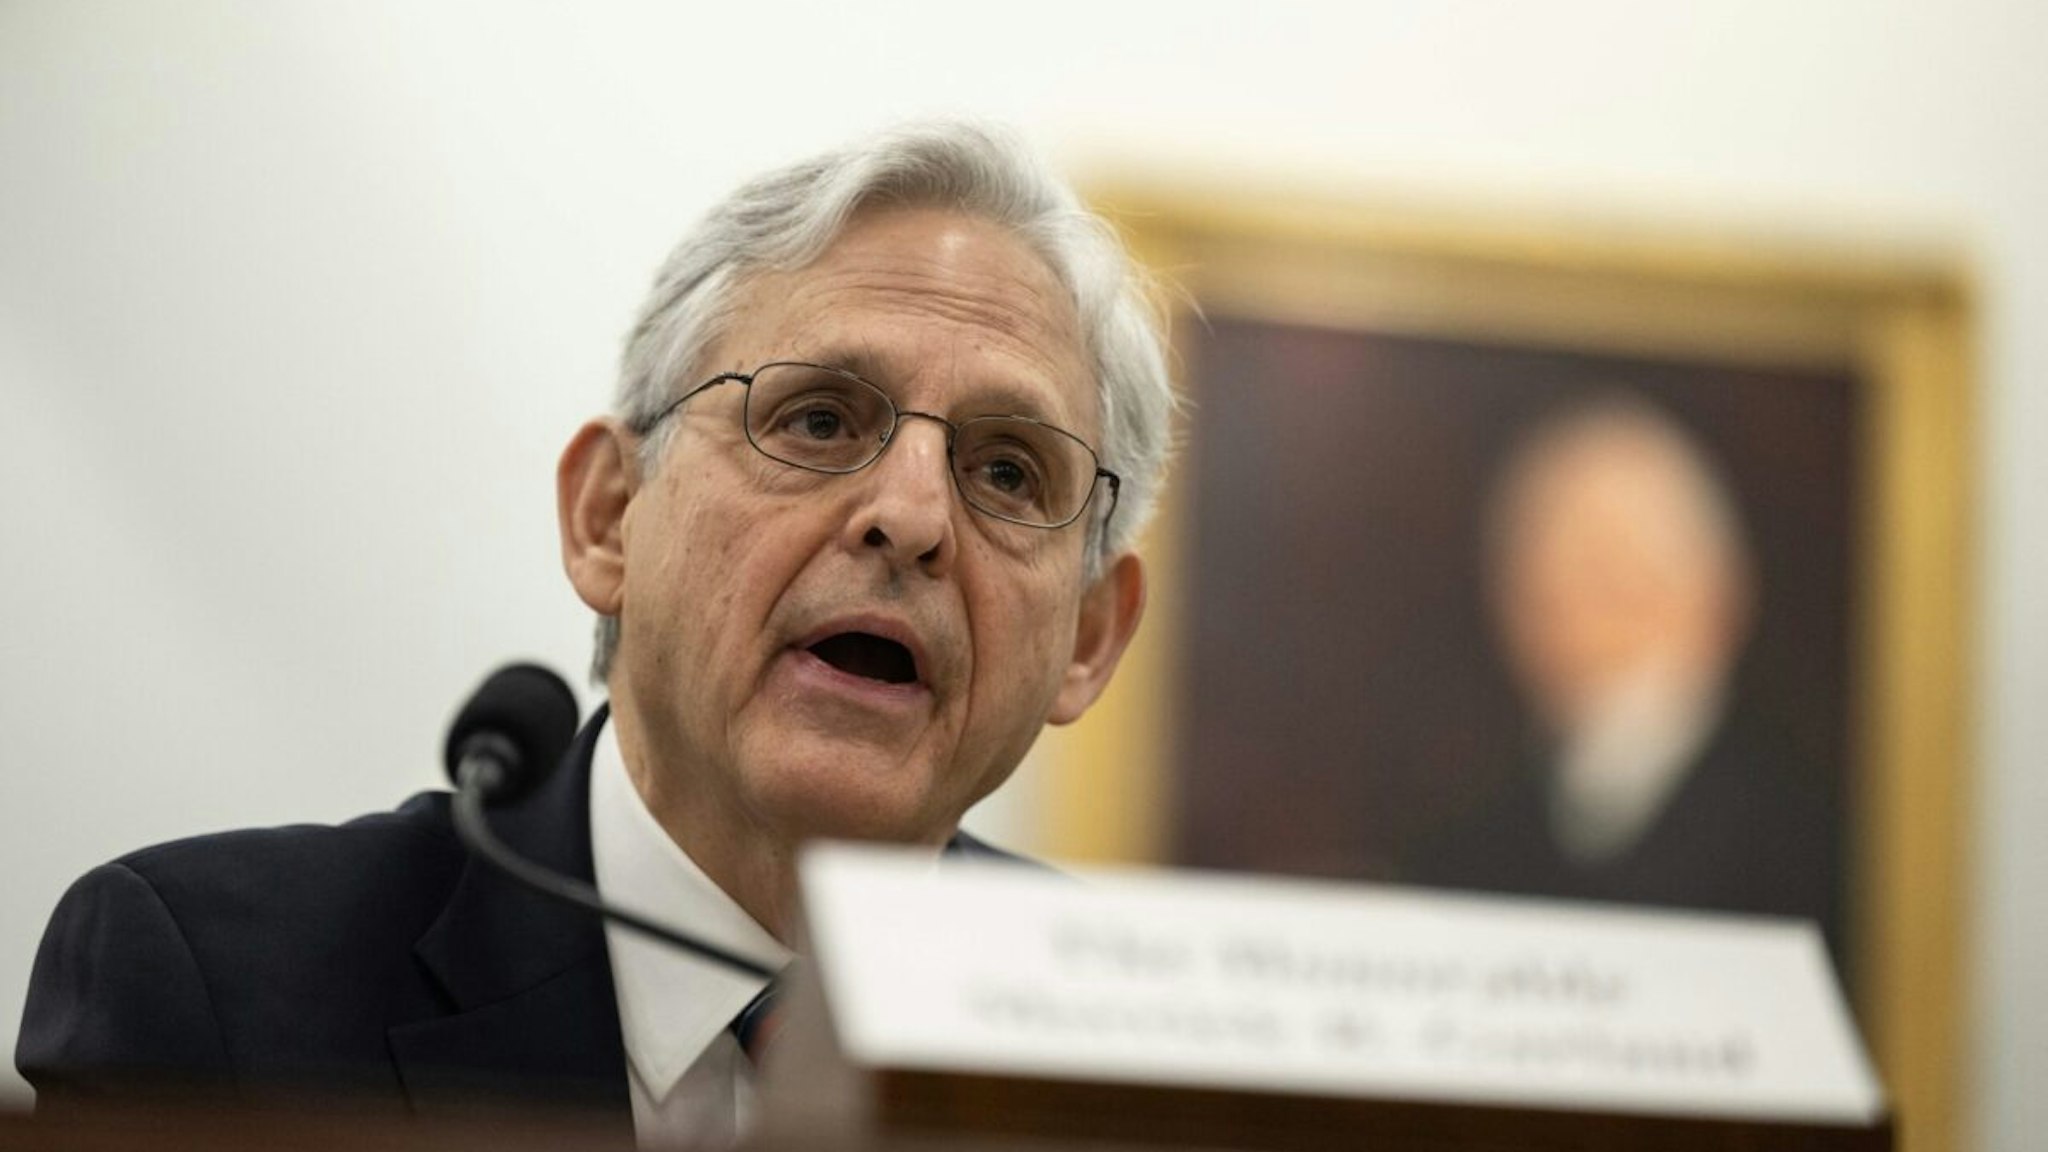 US Attorney General Merrick Garland testifies at a House Appropriations Committee Commerce, Justice, Science, and Related Agencies Subcommittee hearing on "Budget Hearing - FY2024 Request for the Department of Justice" in Washington, DC, March 29, 2023.